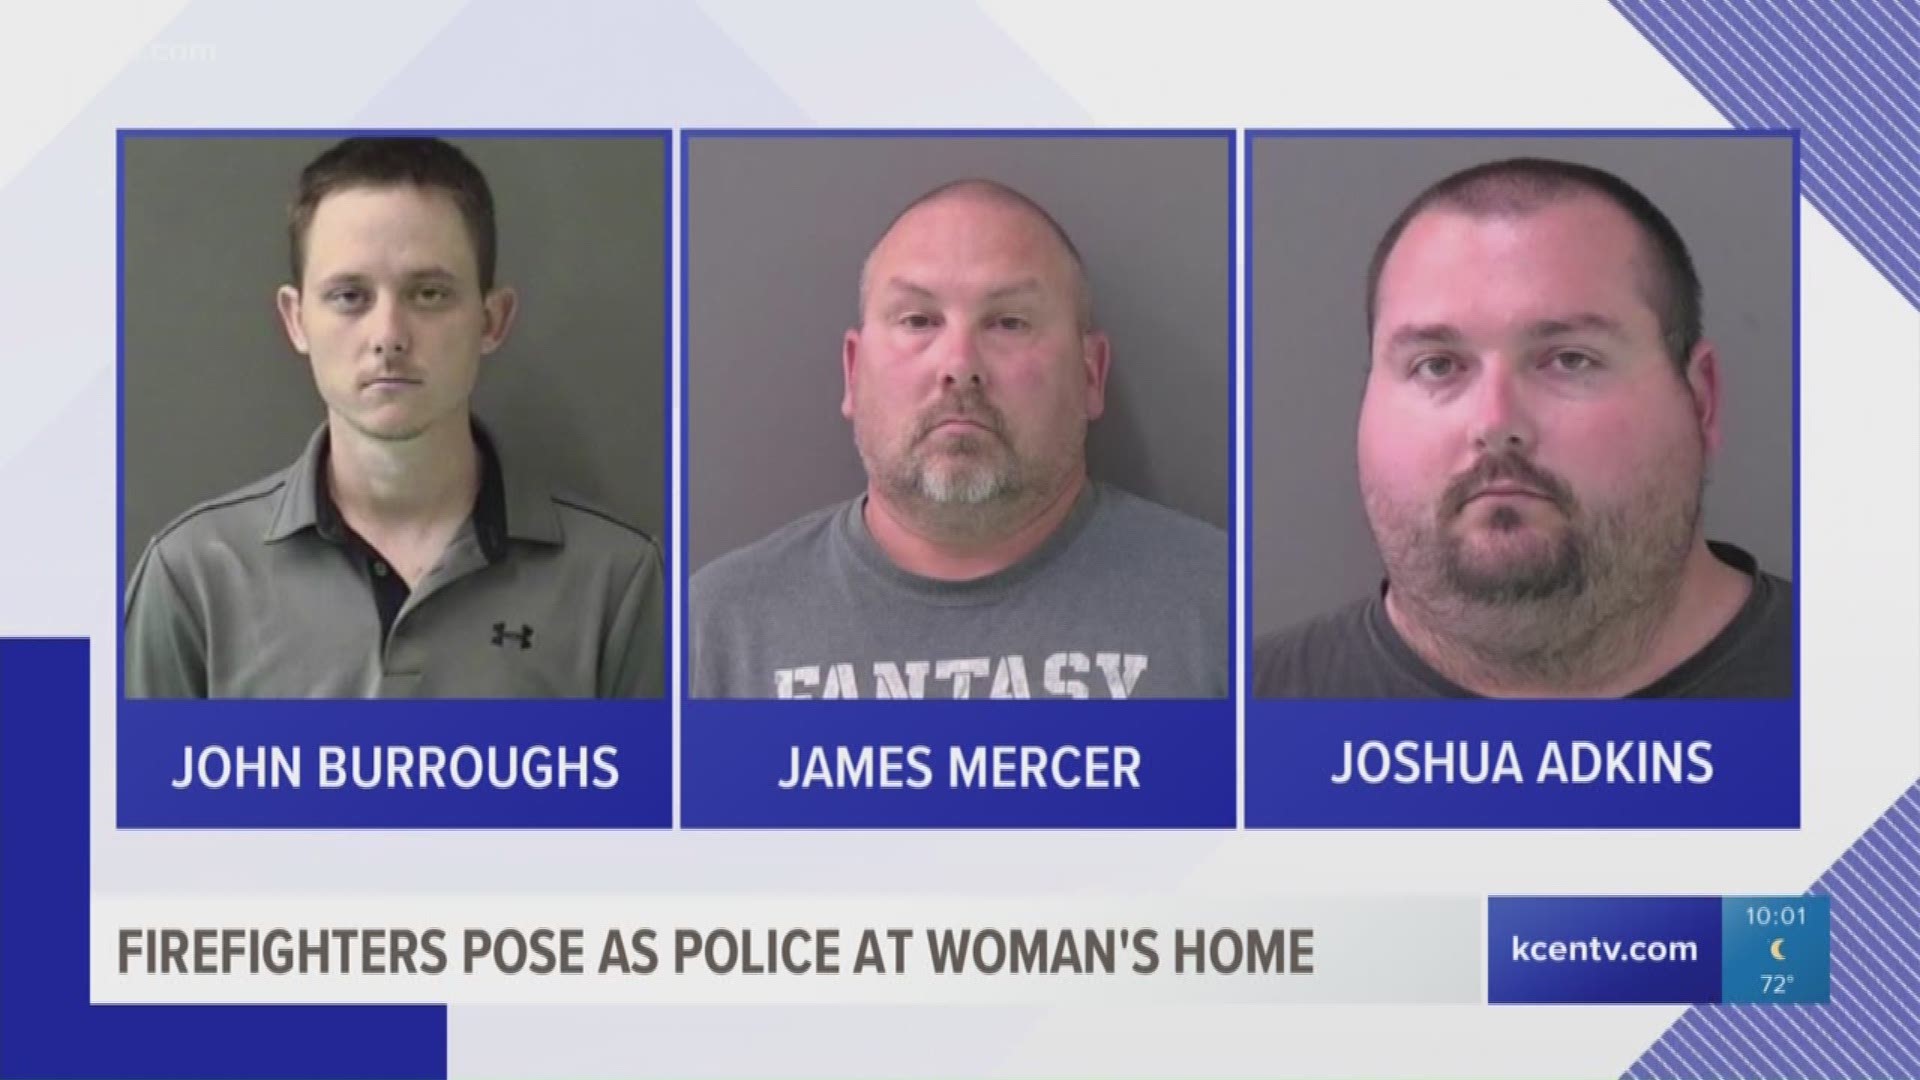 The firefighters who posed as police first confronted the woman on May 1 when they came to her house to "serve her husband with a citation," the affidavit said.